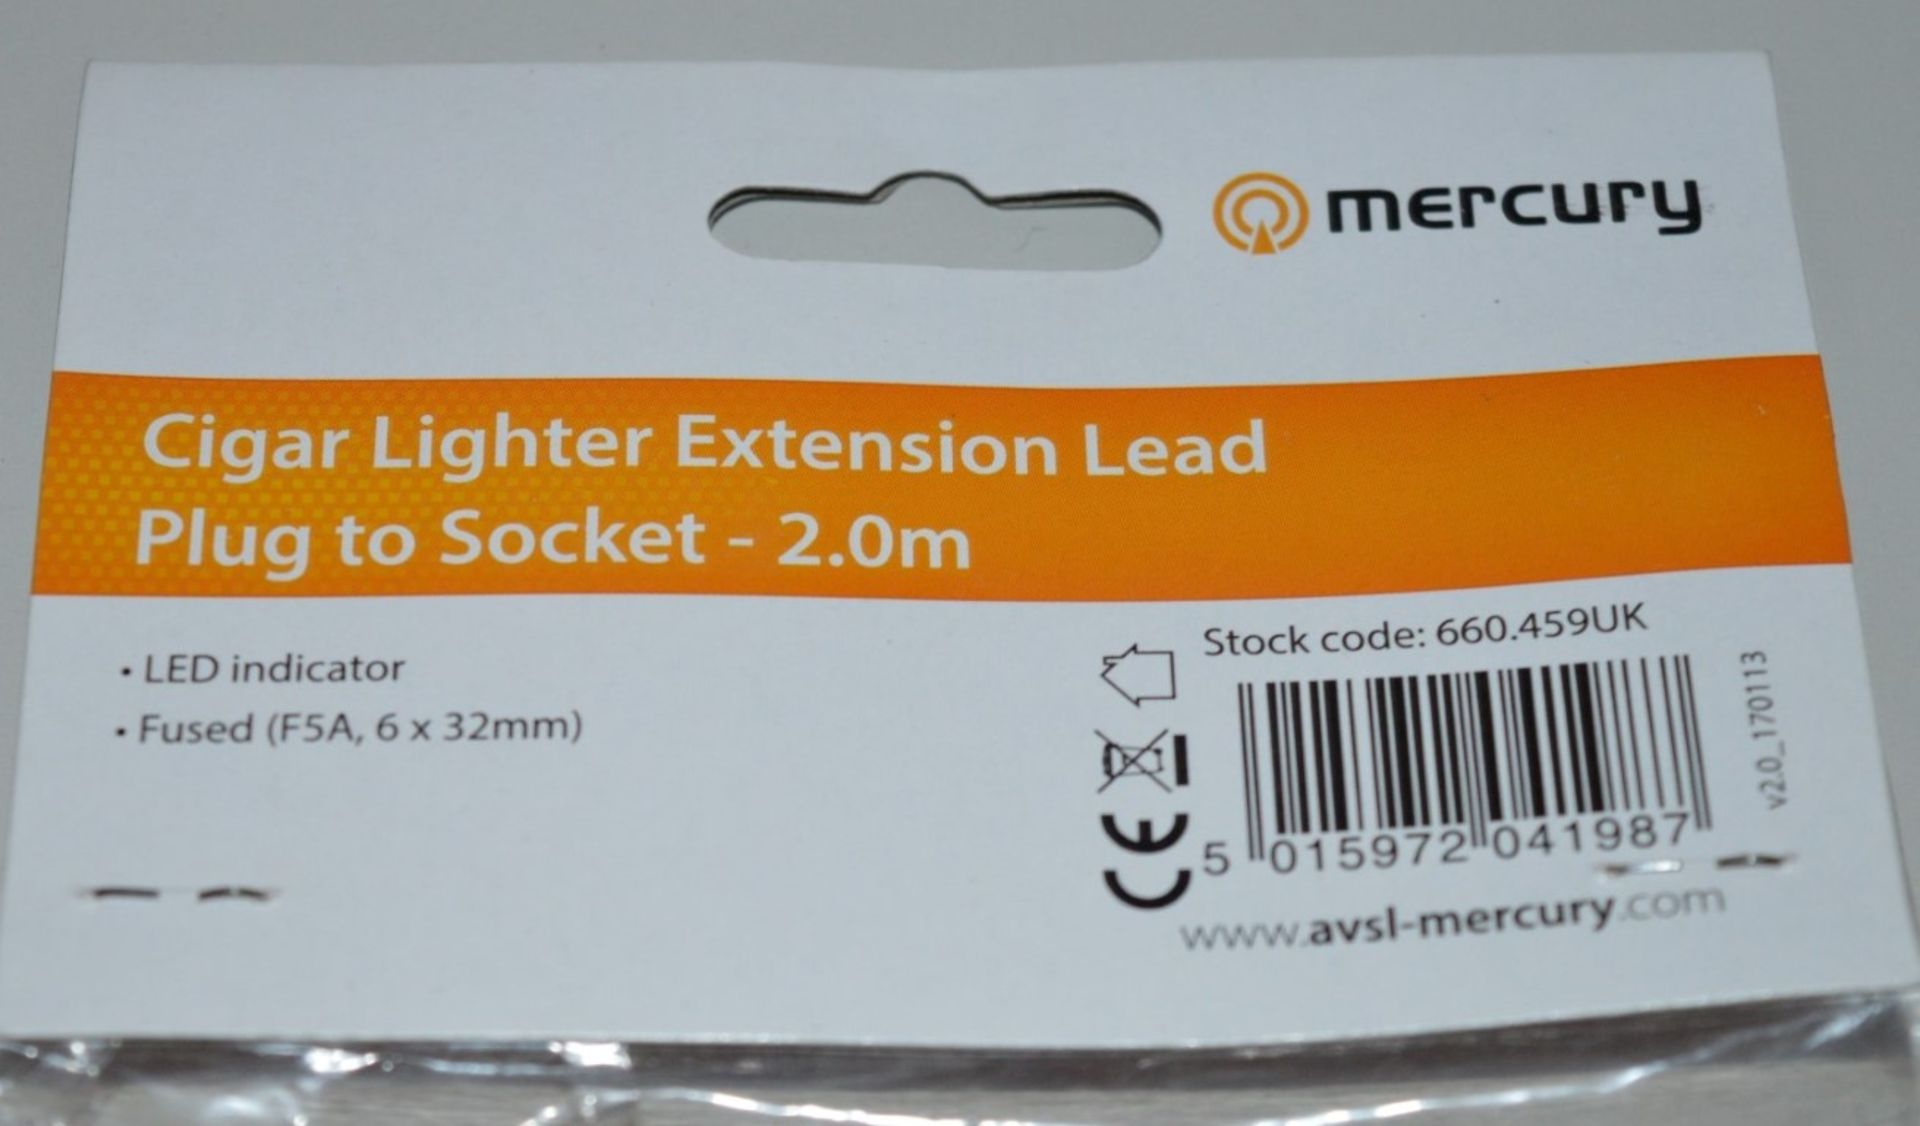 14 x Mercury Cigar Lighter Extension Plug to Socket Leads - 2.0m - Fused FAS 6 x 32MM - With LED - Image 4 of 5